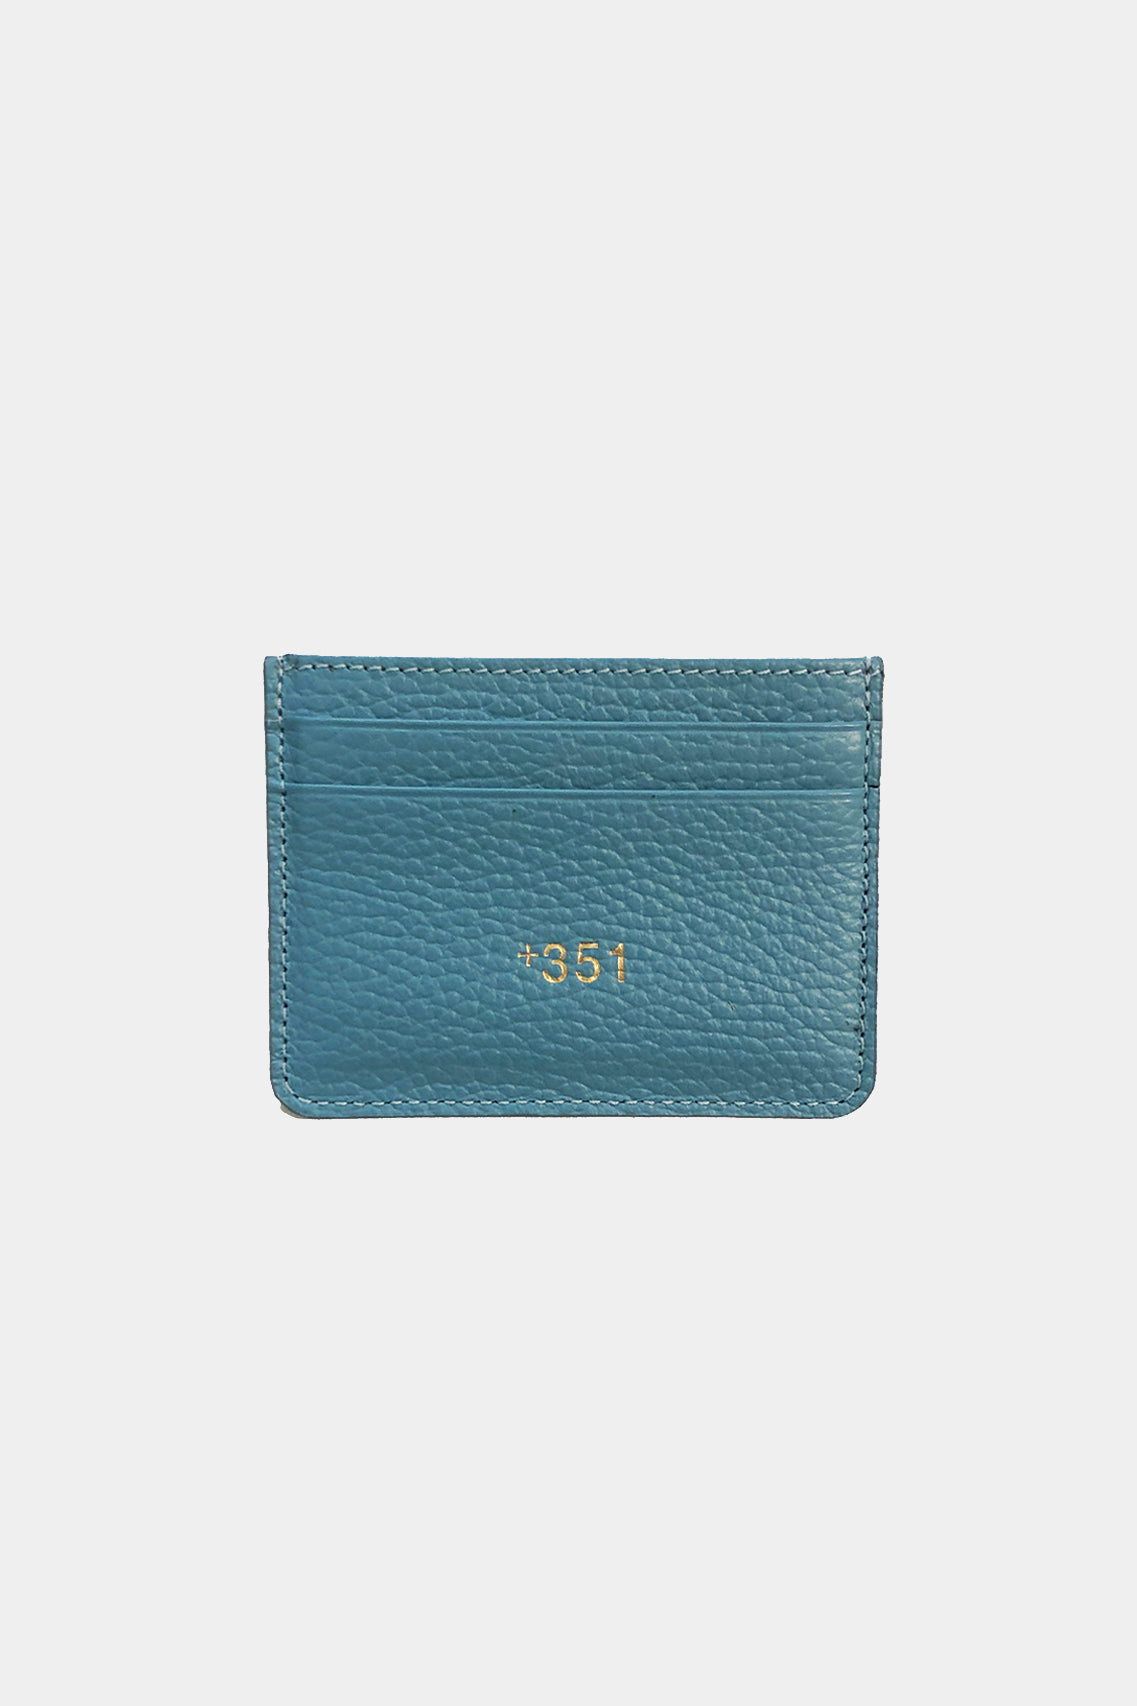 CLEAR BLUE LEATHER CARDHOLDER